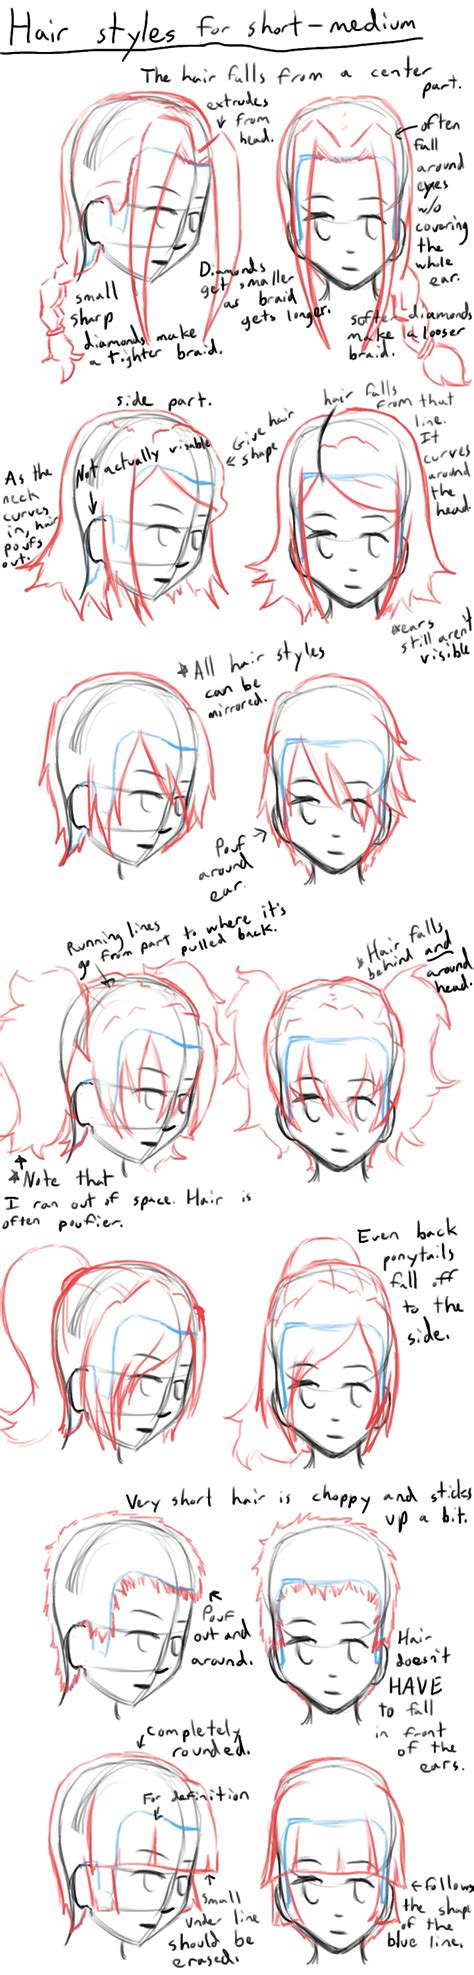 How To Draw Anime Hair Styles By Learntodrawanime On